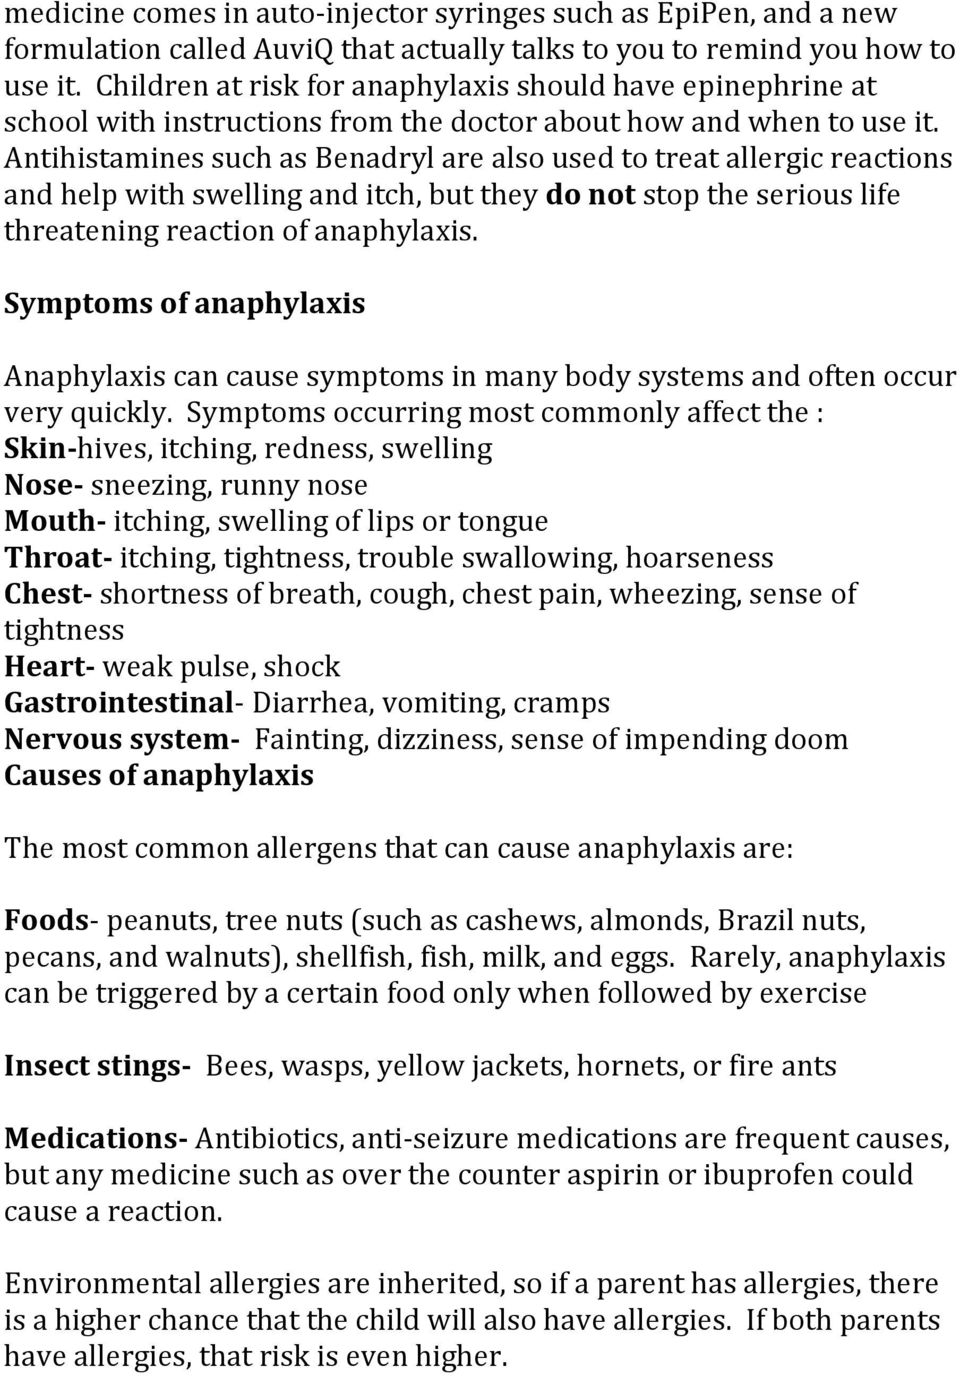 Antihistamines such as Benadryl are also used to treat allergic reactions and help with swelling and itch, but they do not stop the serious life threatening reaction of anaphylaxis.